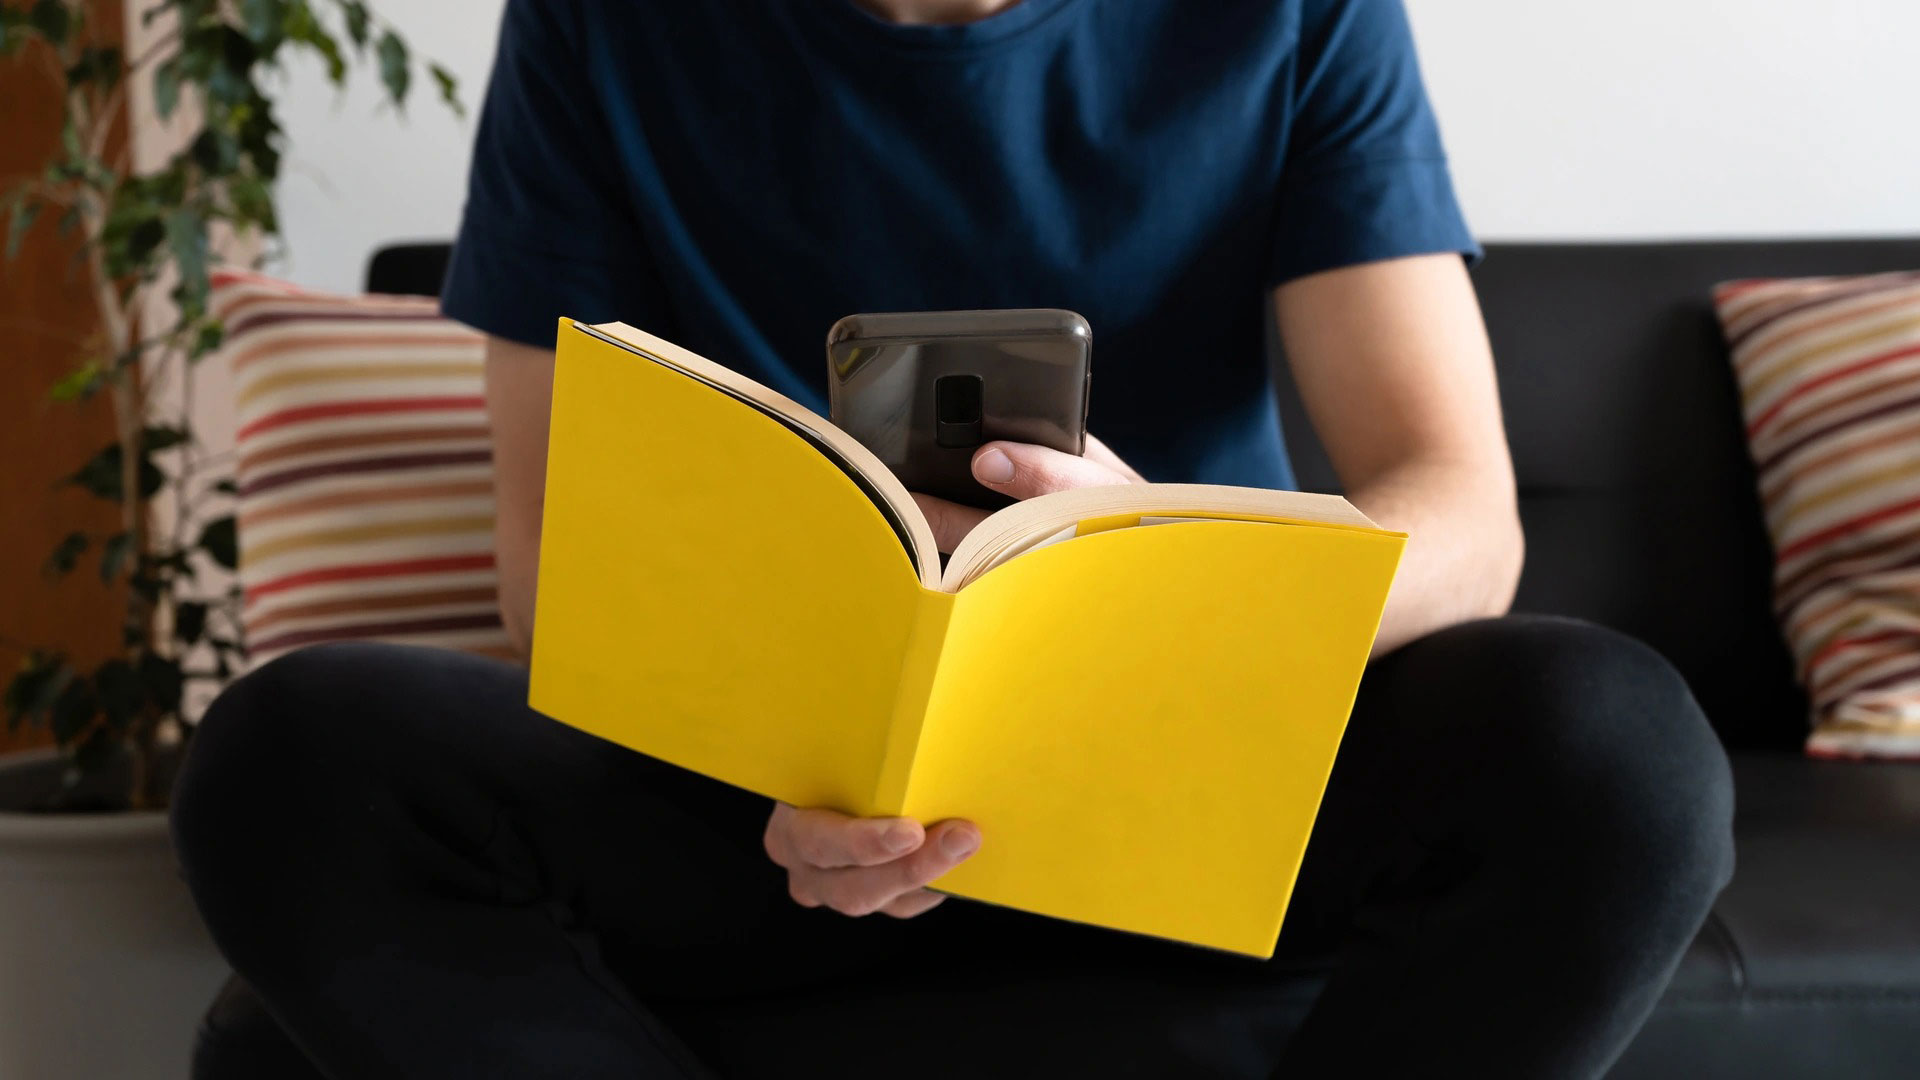 Book and phone as focal point for man reading